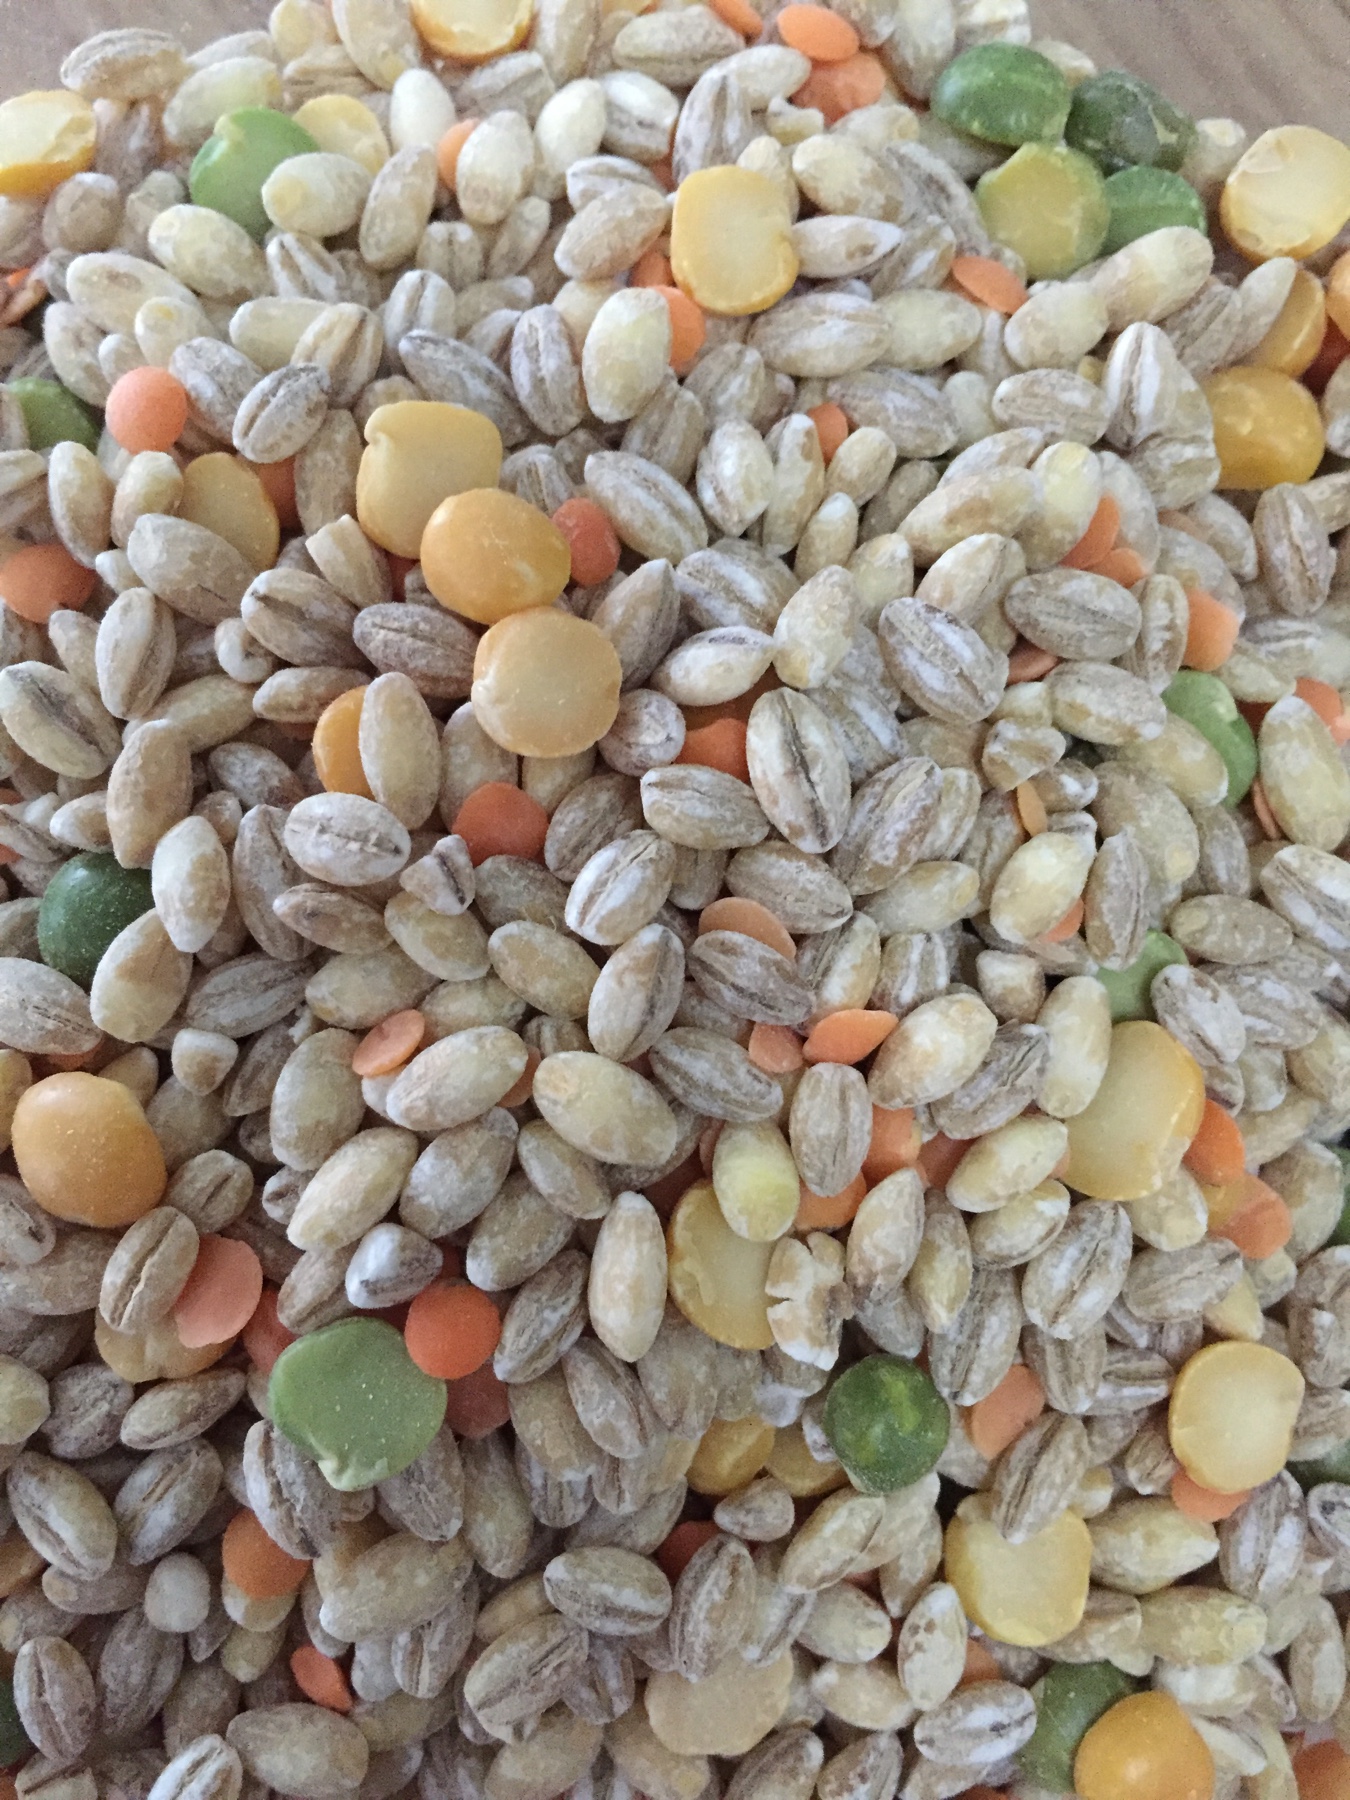 Traditional Ulster Vegetable Soup Mix includes; dried pearl barley, split green peas, split yellow peas and red lentils